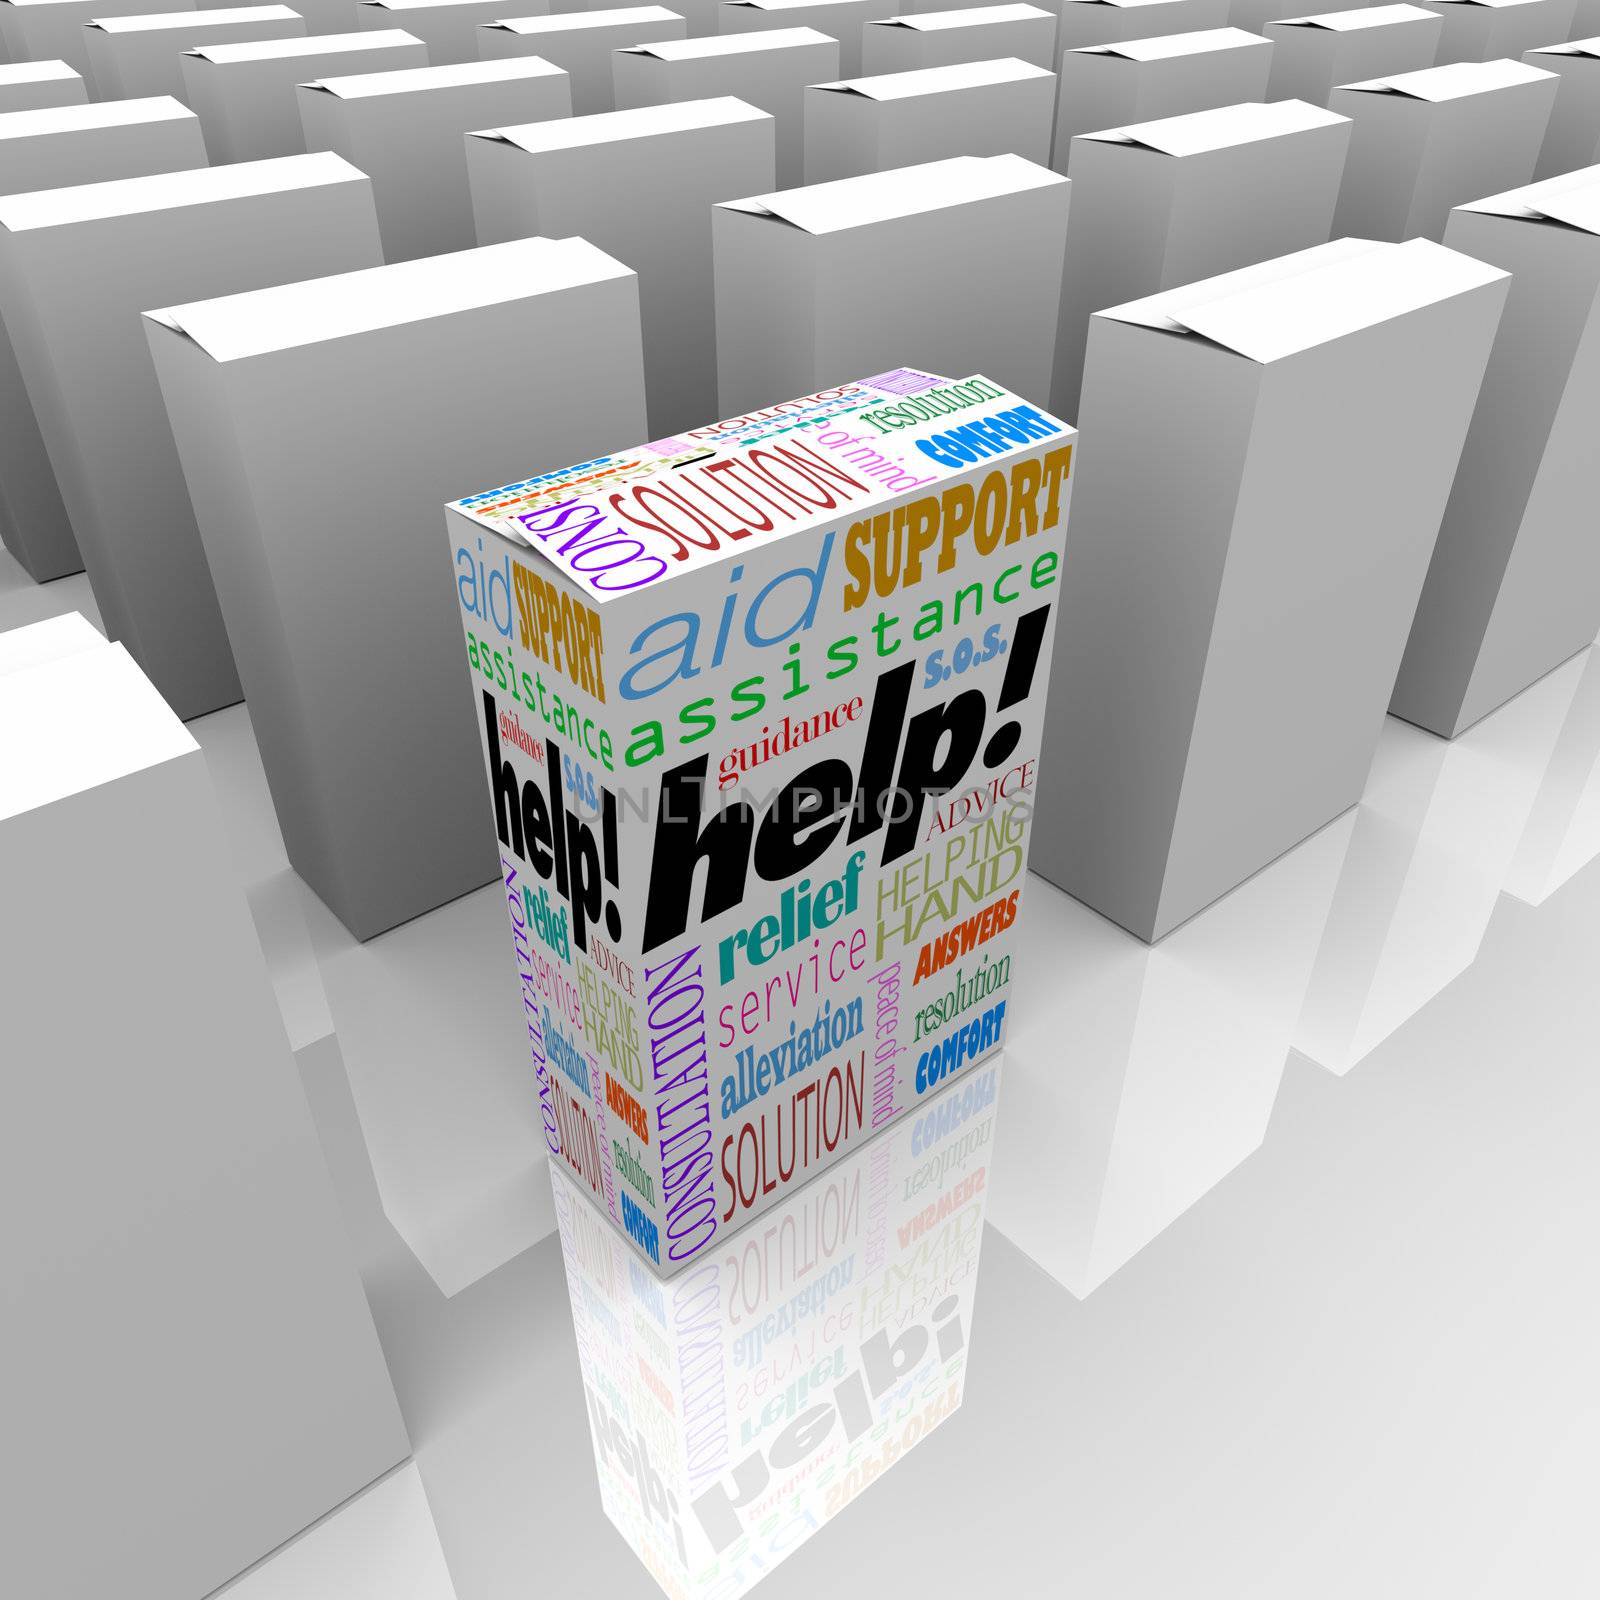 Many boxes on a store shelf, one with the word Help representing customer support, assistance, service, aid, consultation, solution, answers, resolution, comfort, relief, helping hand, advice, peace of mind, guidance, and s.o.s.